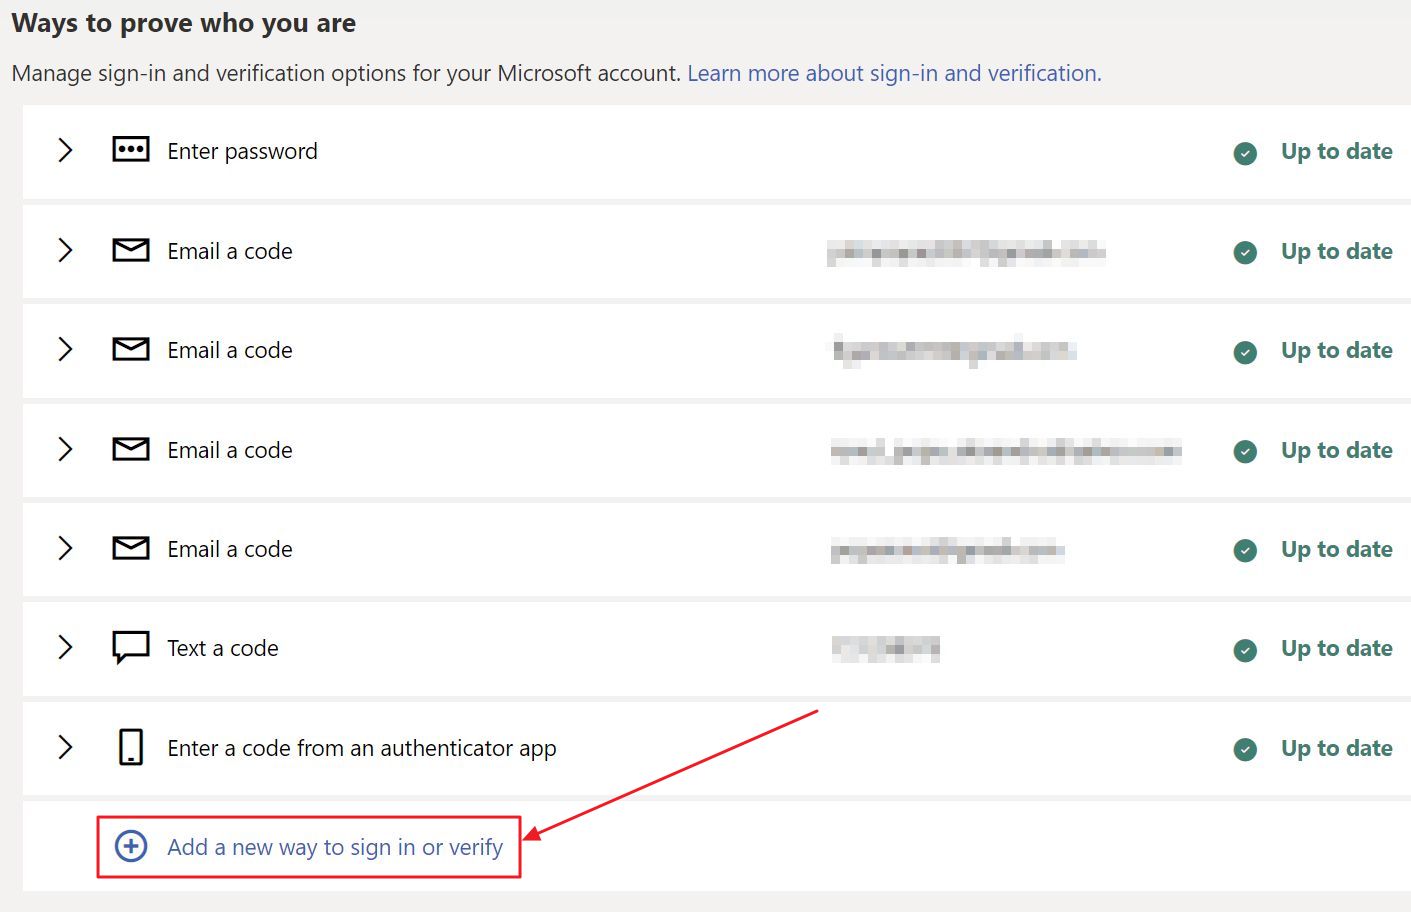 microsoft account ways to prove who you are